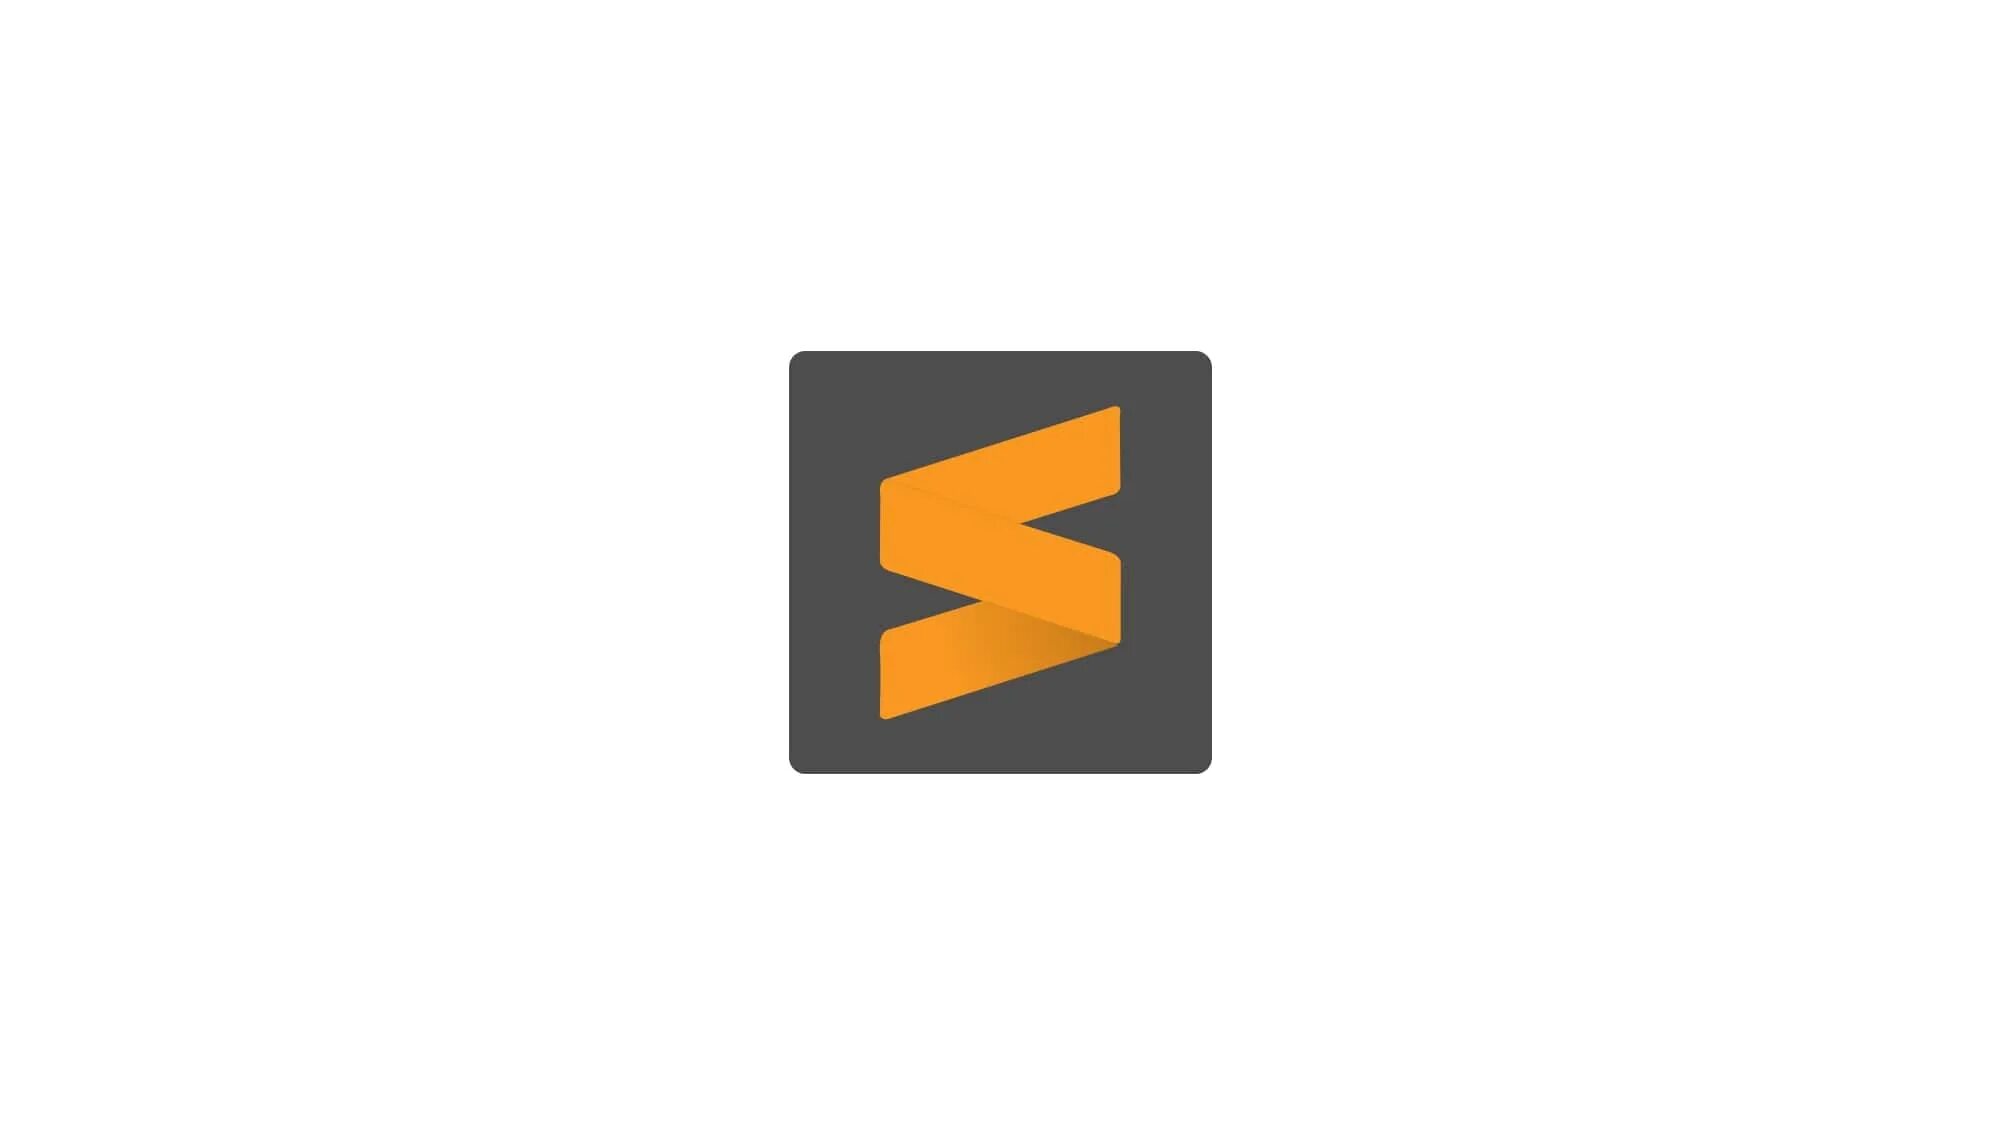 Sublime text. Sublime text 3. Sublime text картинки. Значок Sublime text.